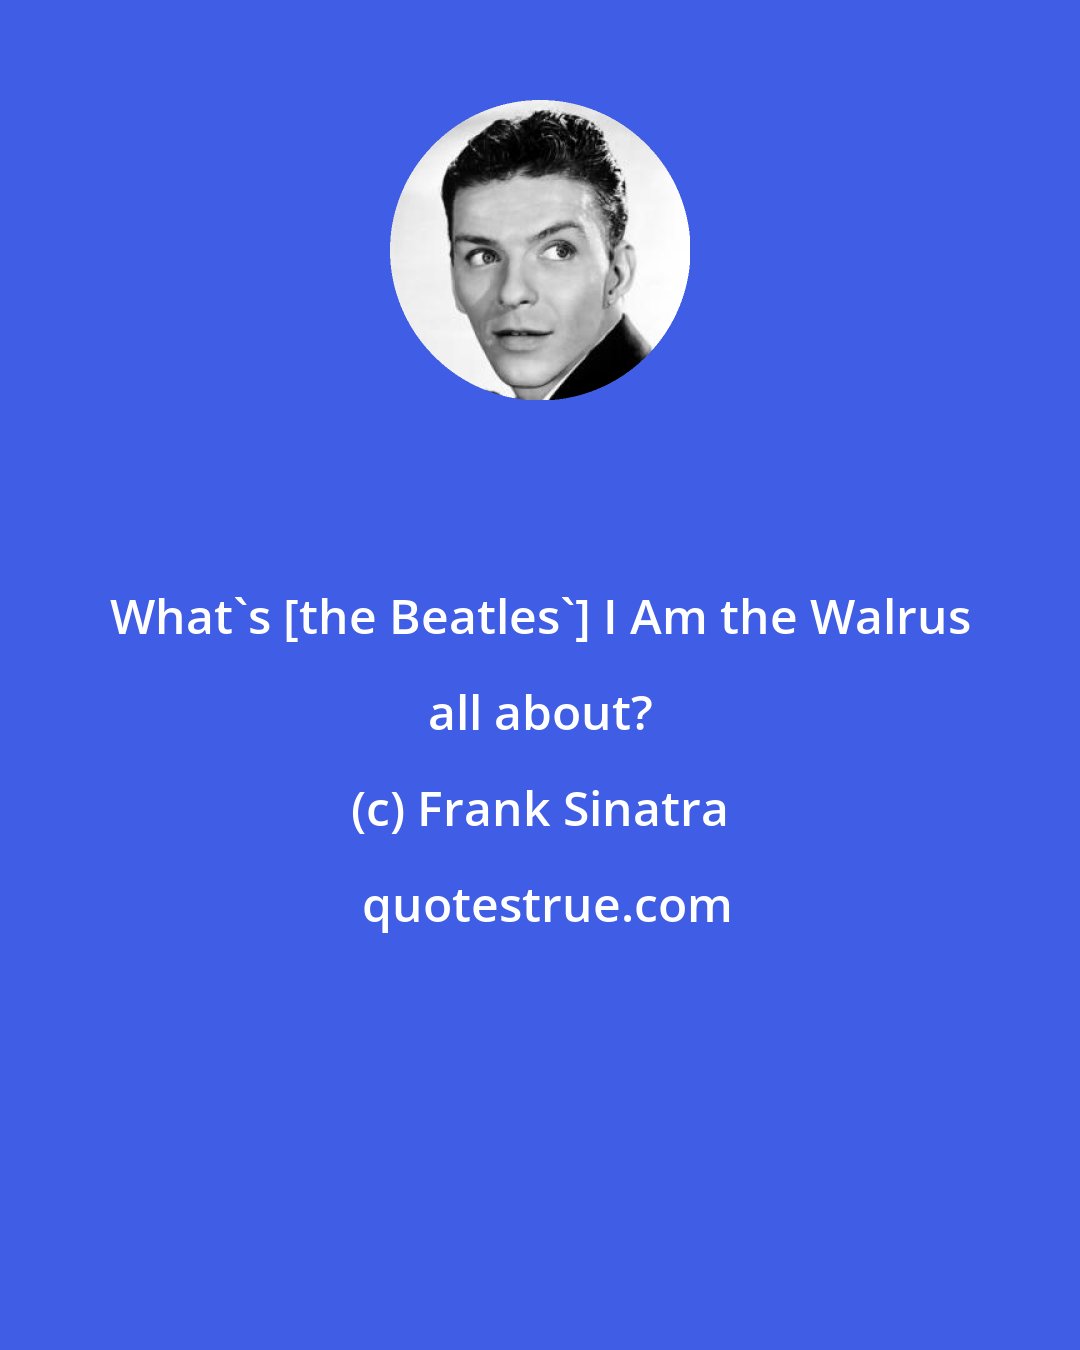 Frank Sinatra: What's [the Beatles'] I Am the Walrus all about?